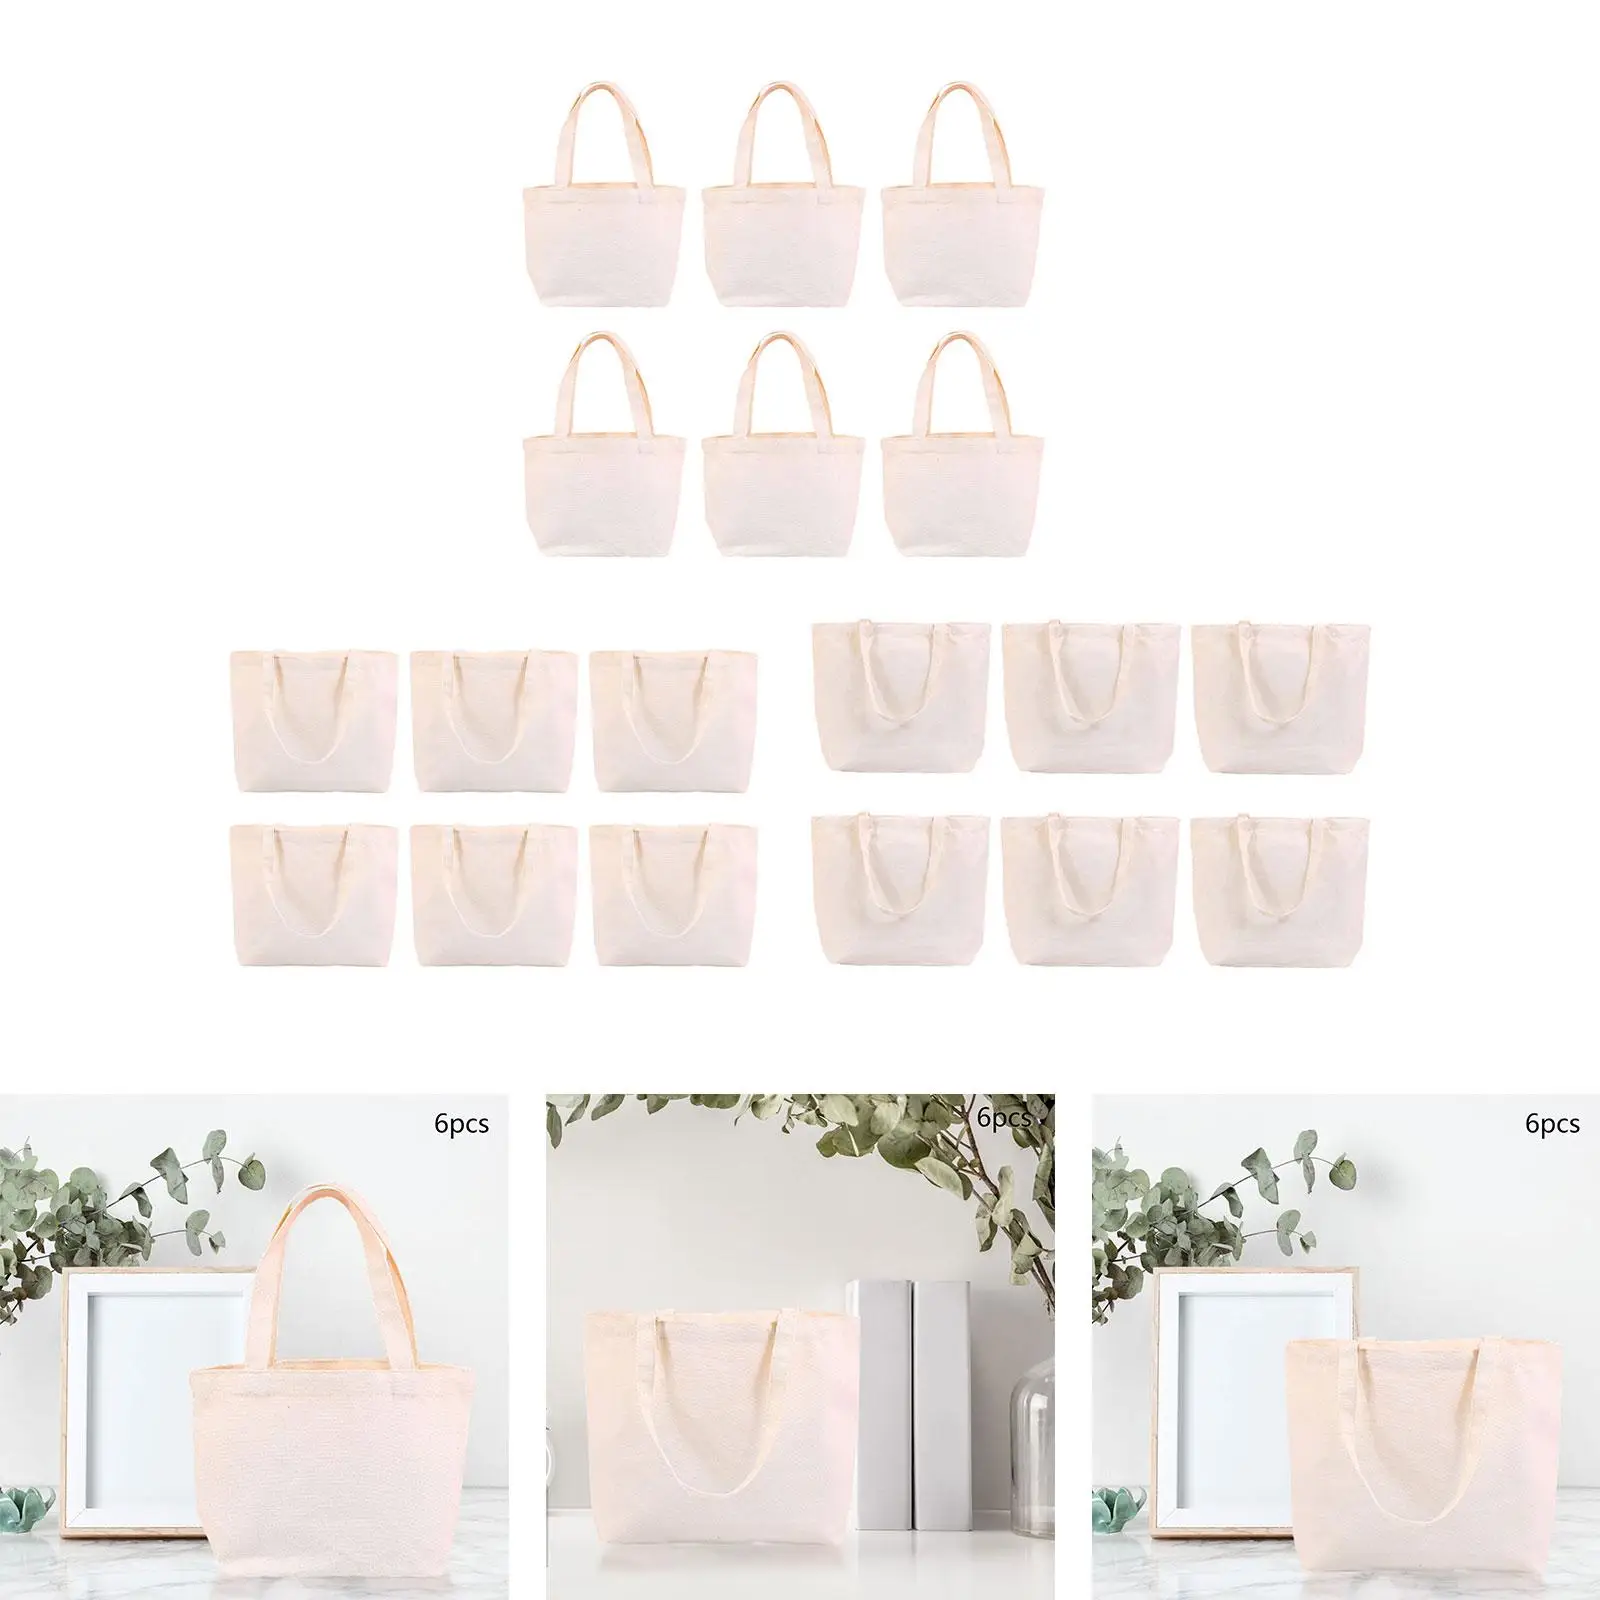 6 Pieces Canvas Tote Bags Top Handle Shopping Bag Canvas Fabric Bags for DIY Projects Advertising Painting Embroidery Decoration